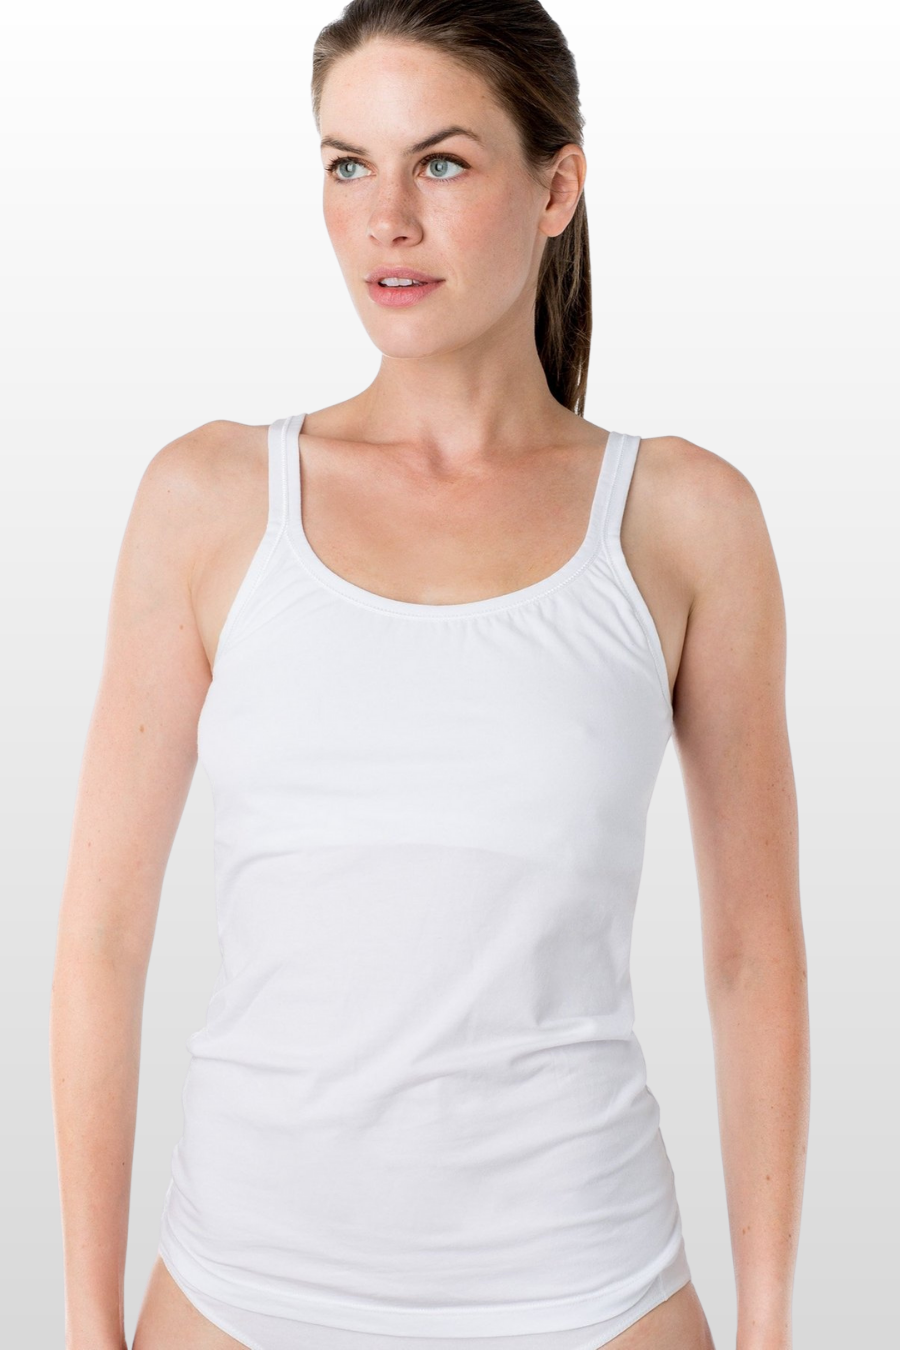 WOMEN'S CLASSIC FIT CAMISOLE WITH BUILT-IN SHELF BRA – Butter Studio